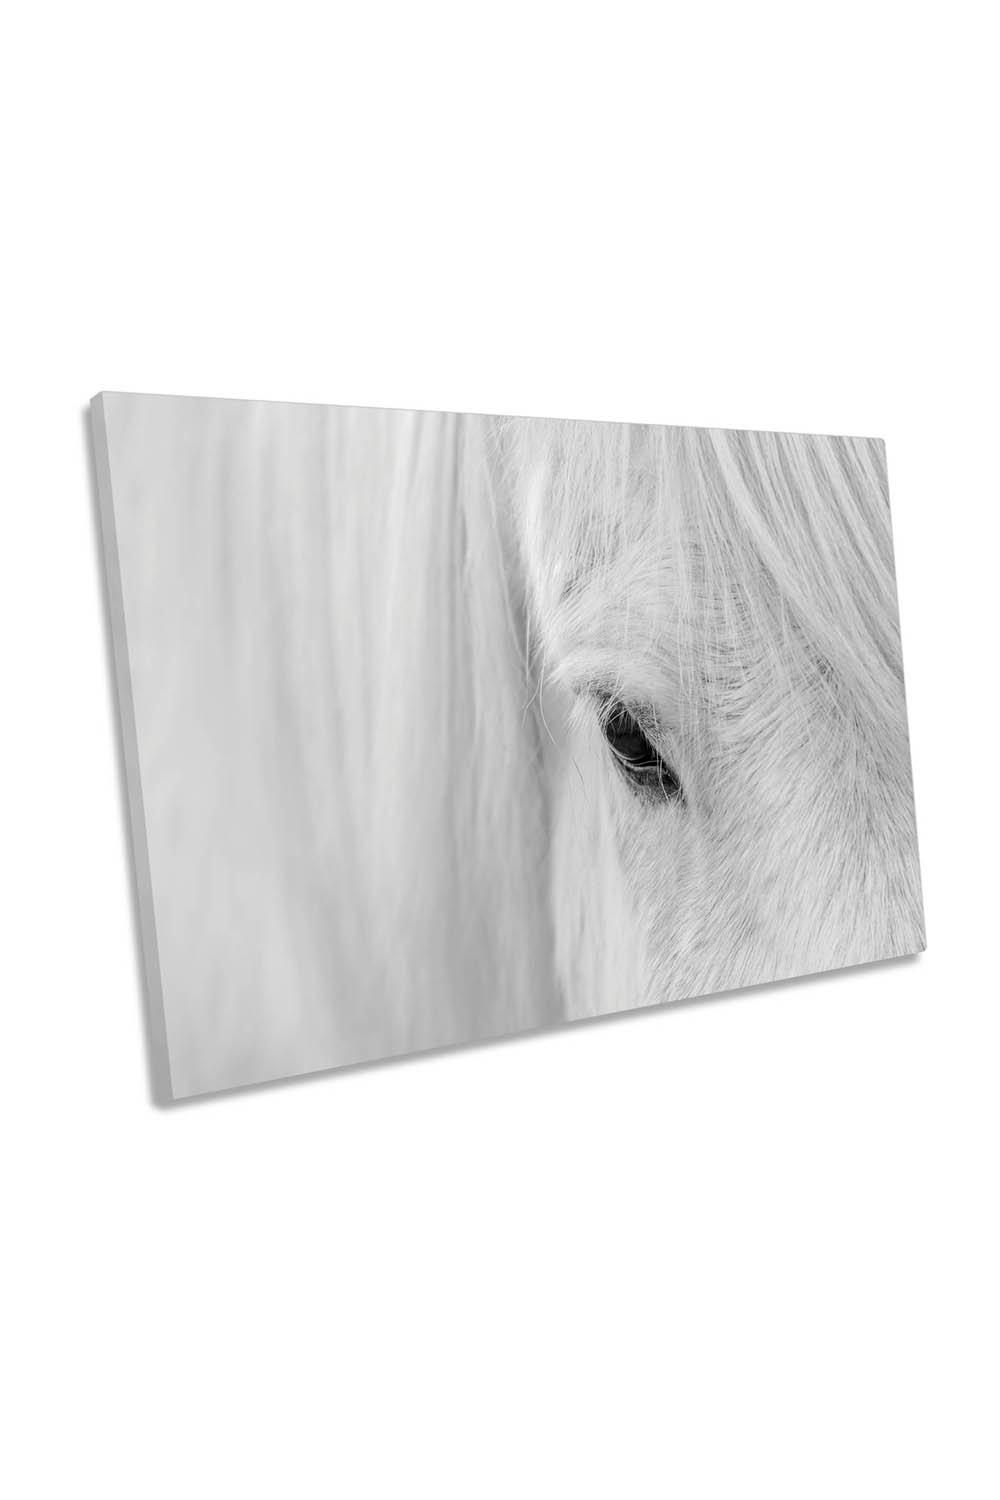 Whisper of Iceland Horse Canvas Wall Art Picture Print